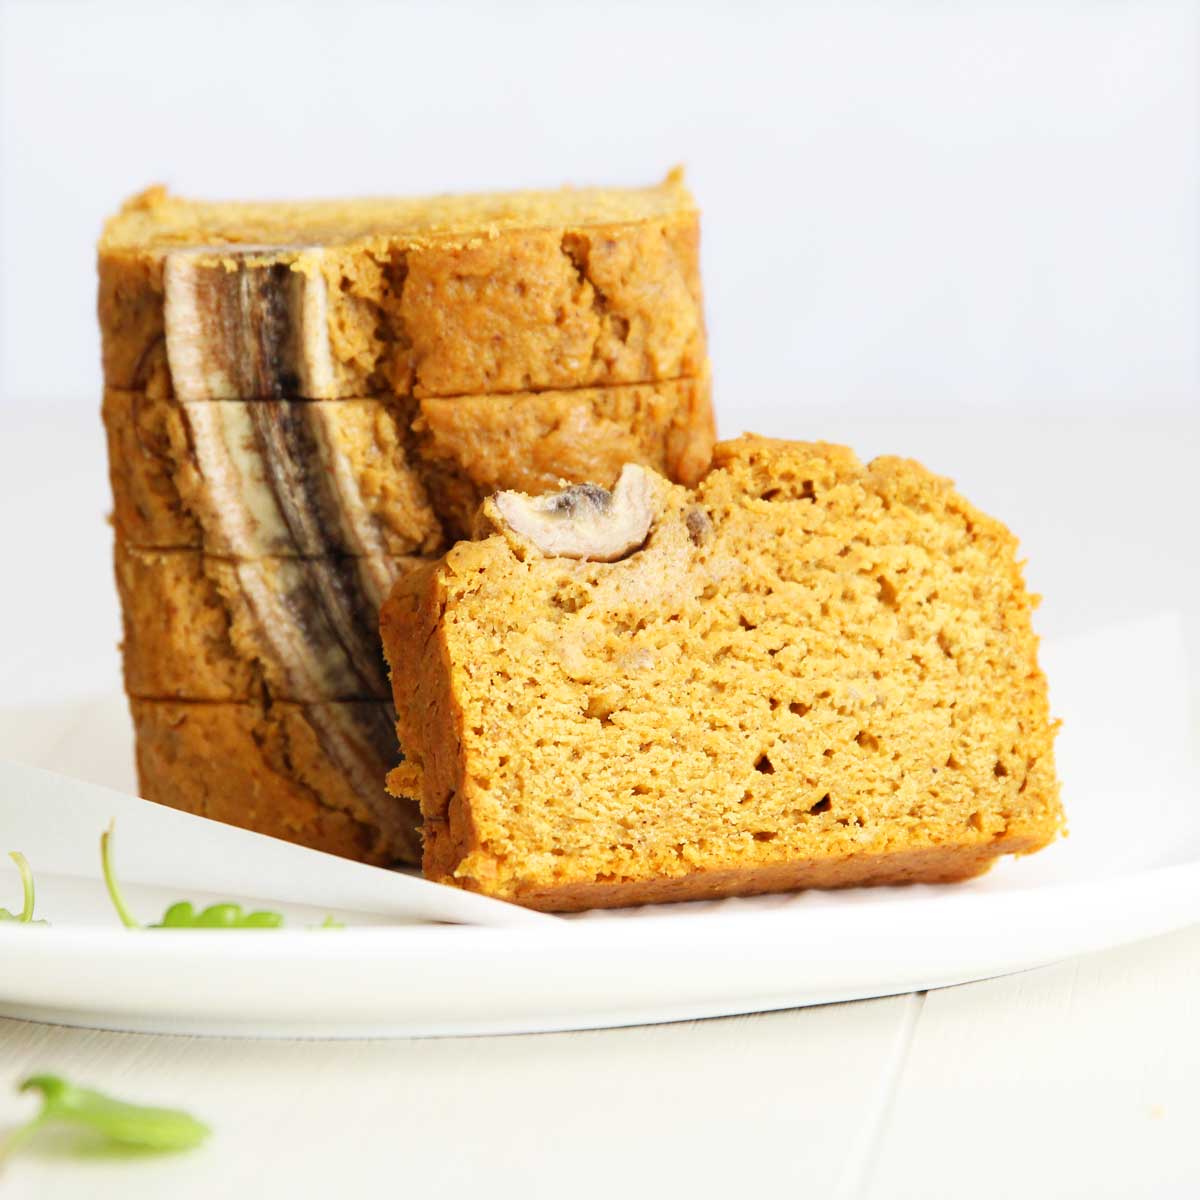 Super Moist Olive Oil Pumpkin Bread With Banana (Eggless & Dairy Free) - Peppermint Whipped Cream